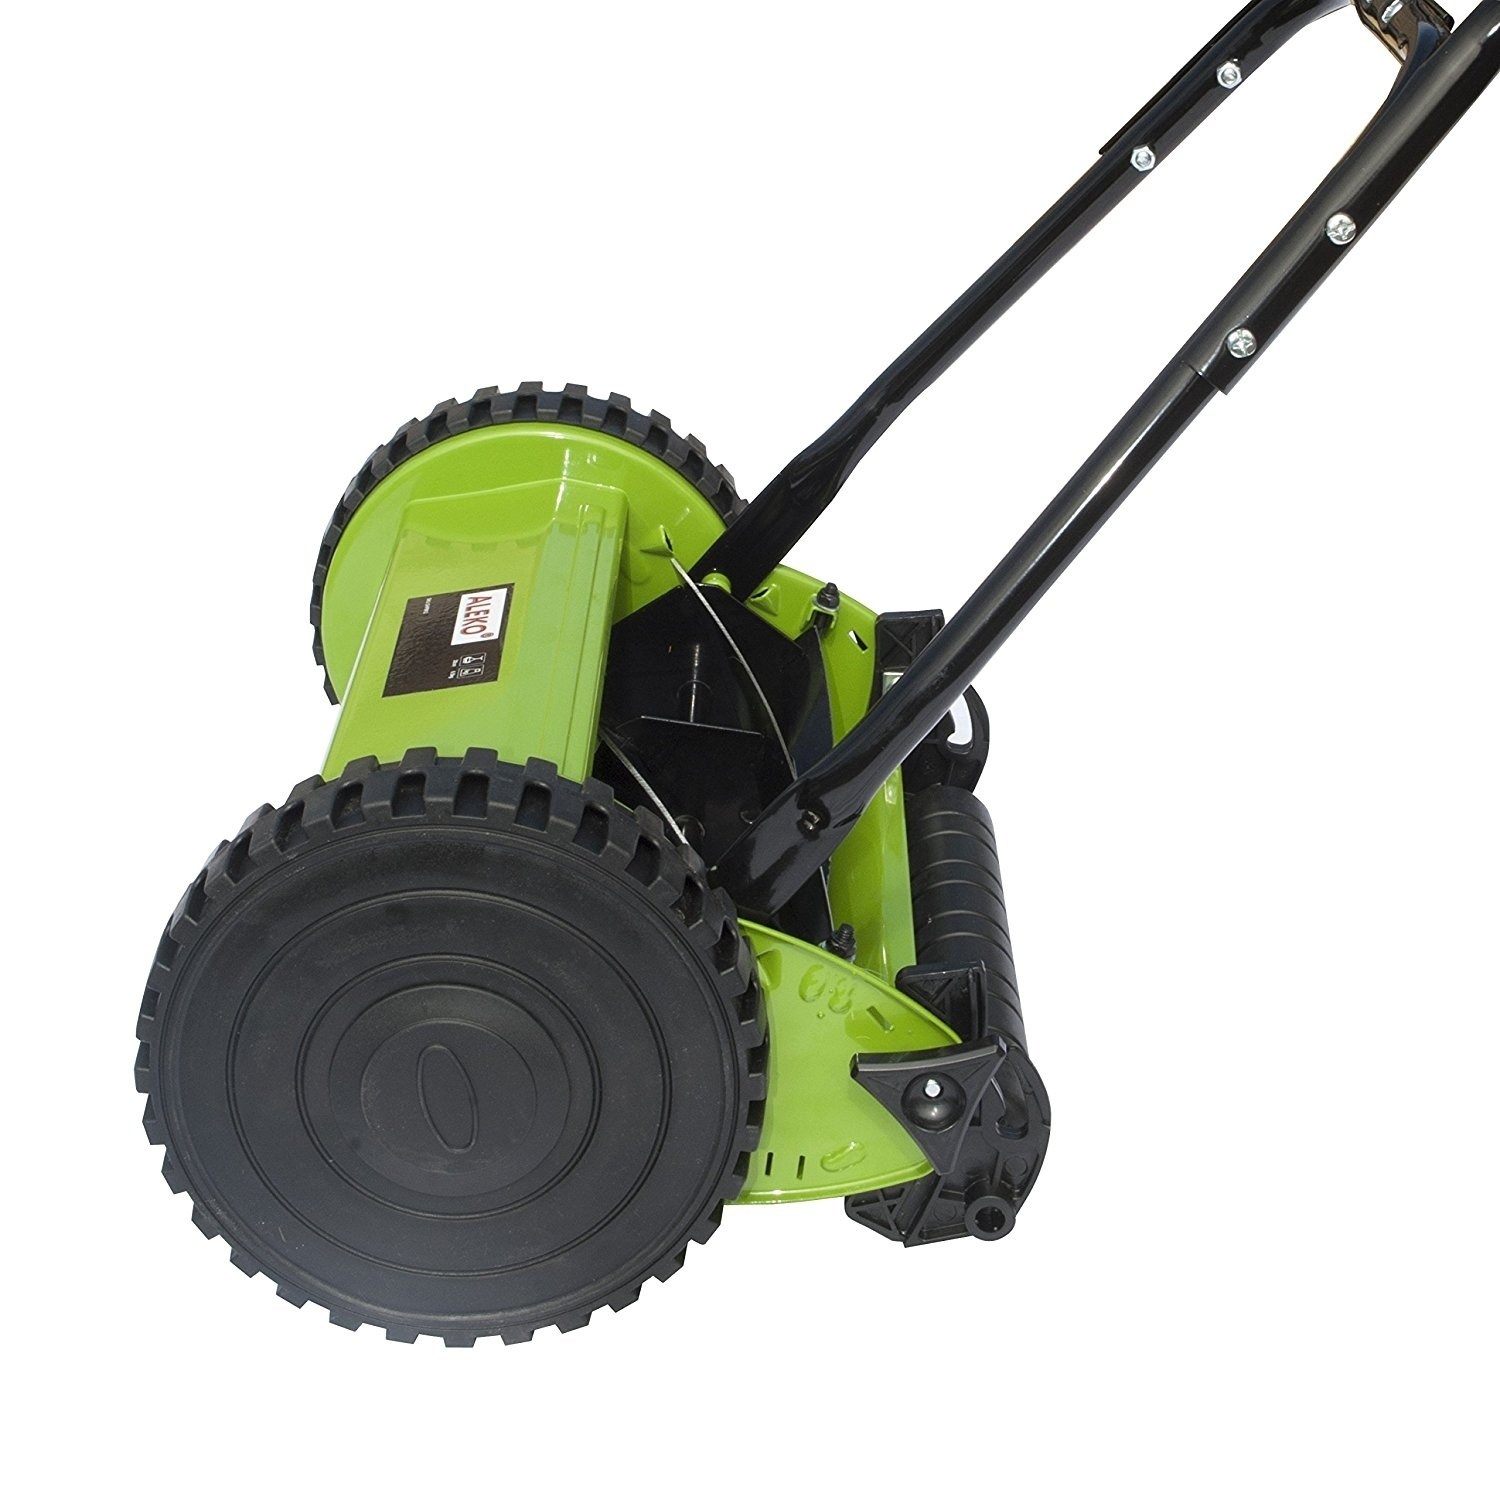 ALEKO Hand Push Lawn Mower with Adjustable Cutting Height - 5-Blade - 12-Inch - image 4 of 5